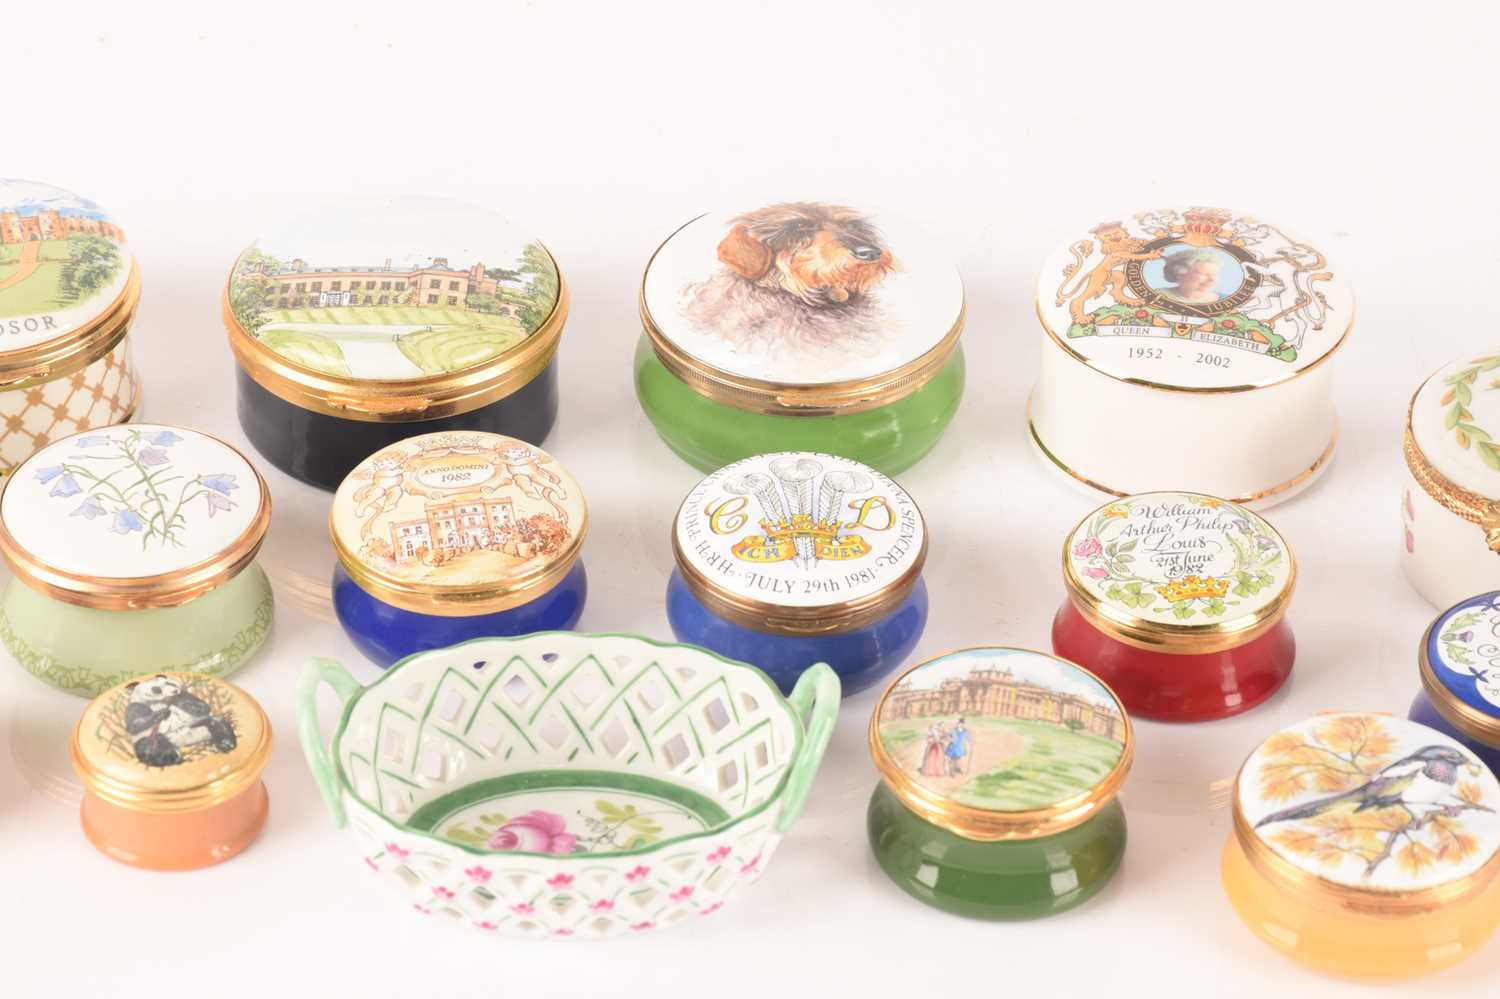 A collection of enamel trinket boxes from a variety of makers including Limoges, Halycon Days, Crumm - Image 3 of 10